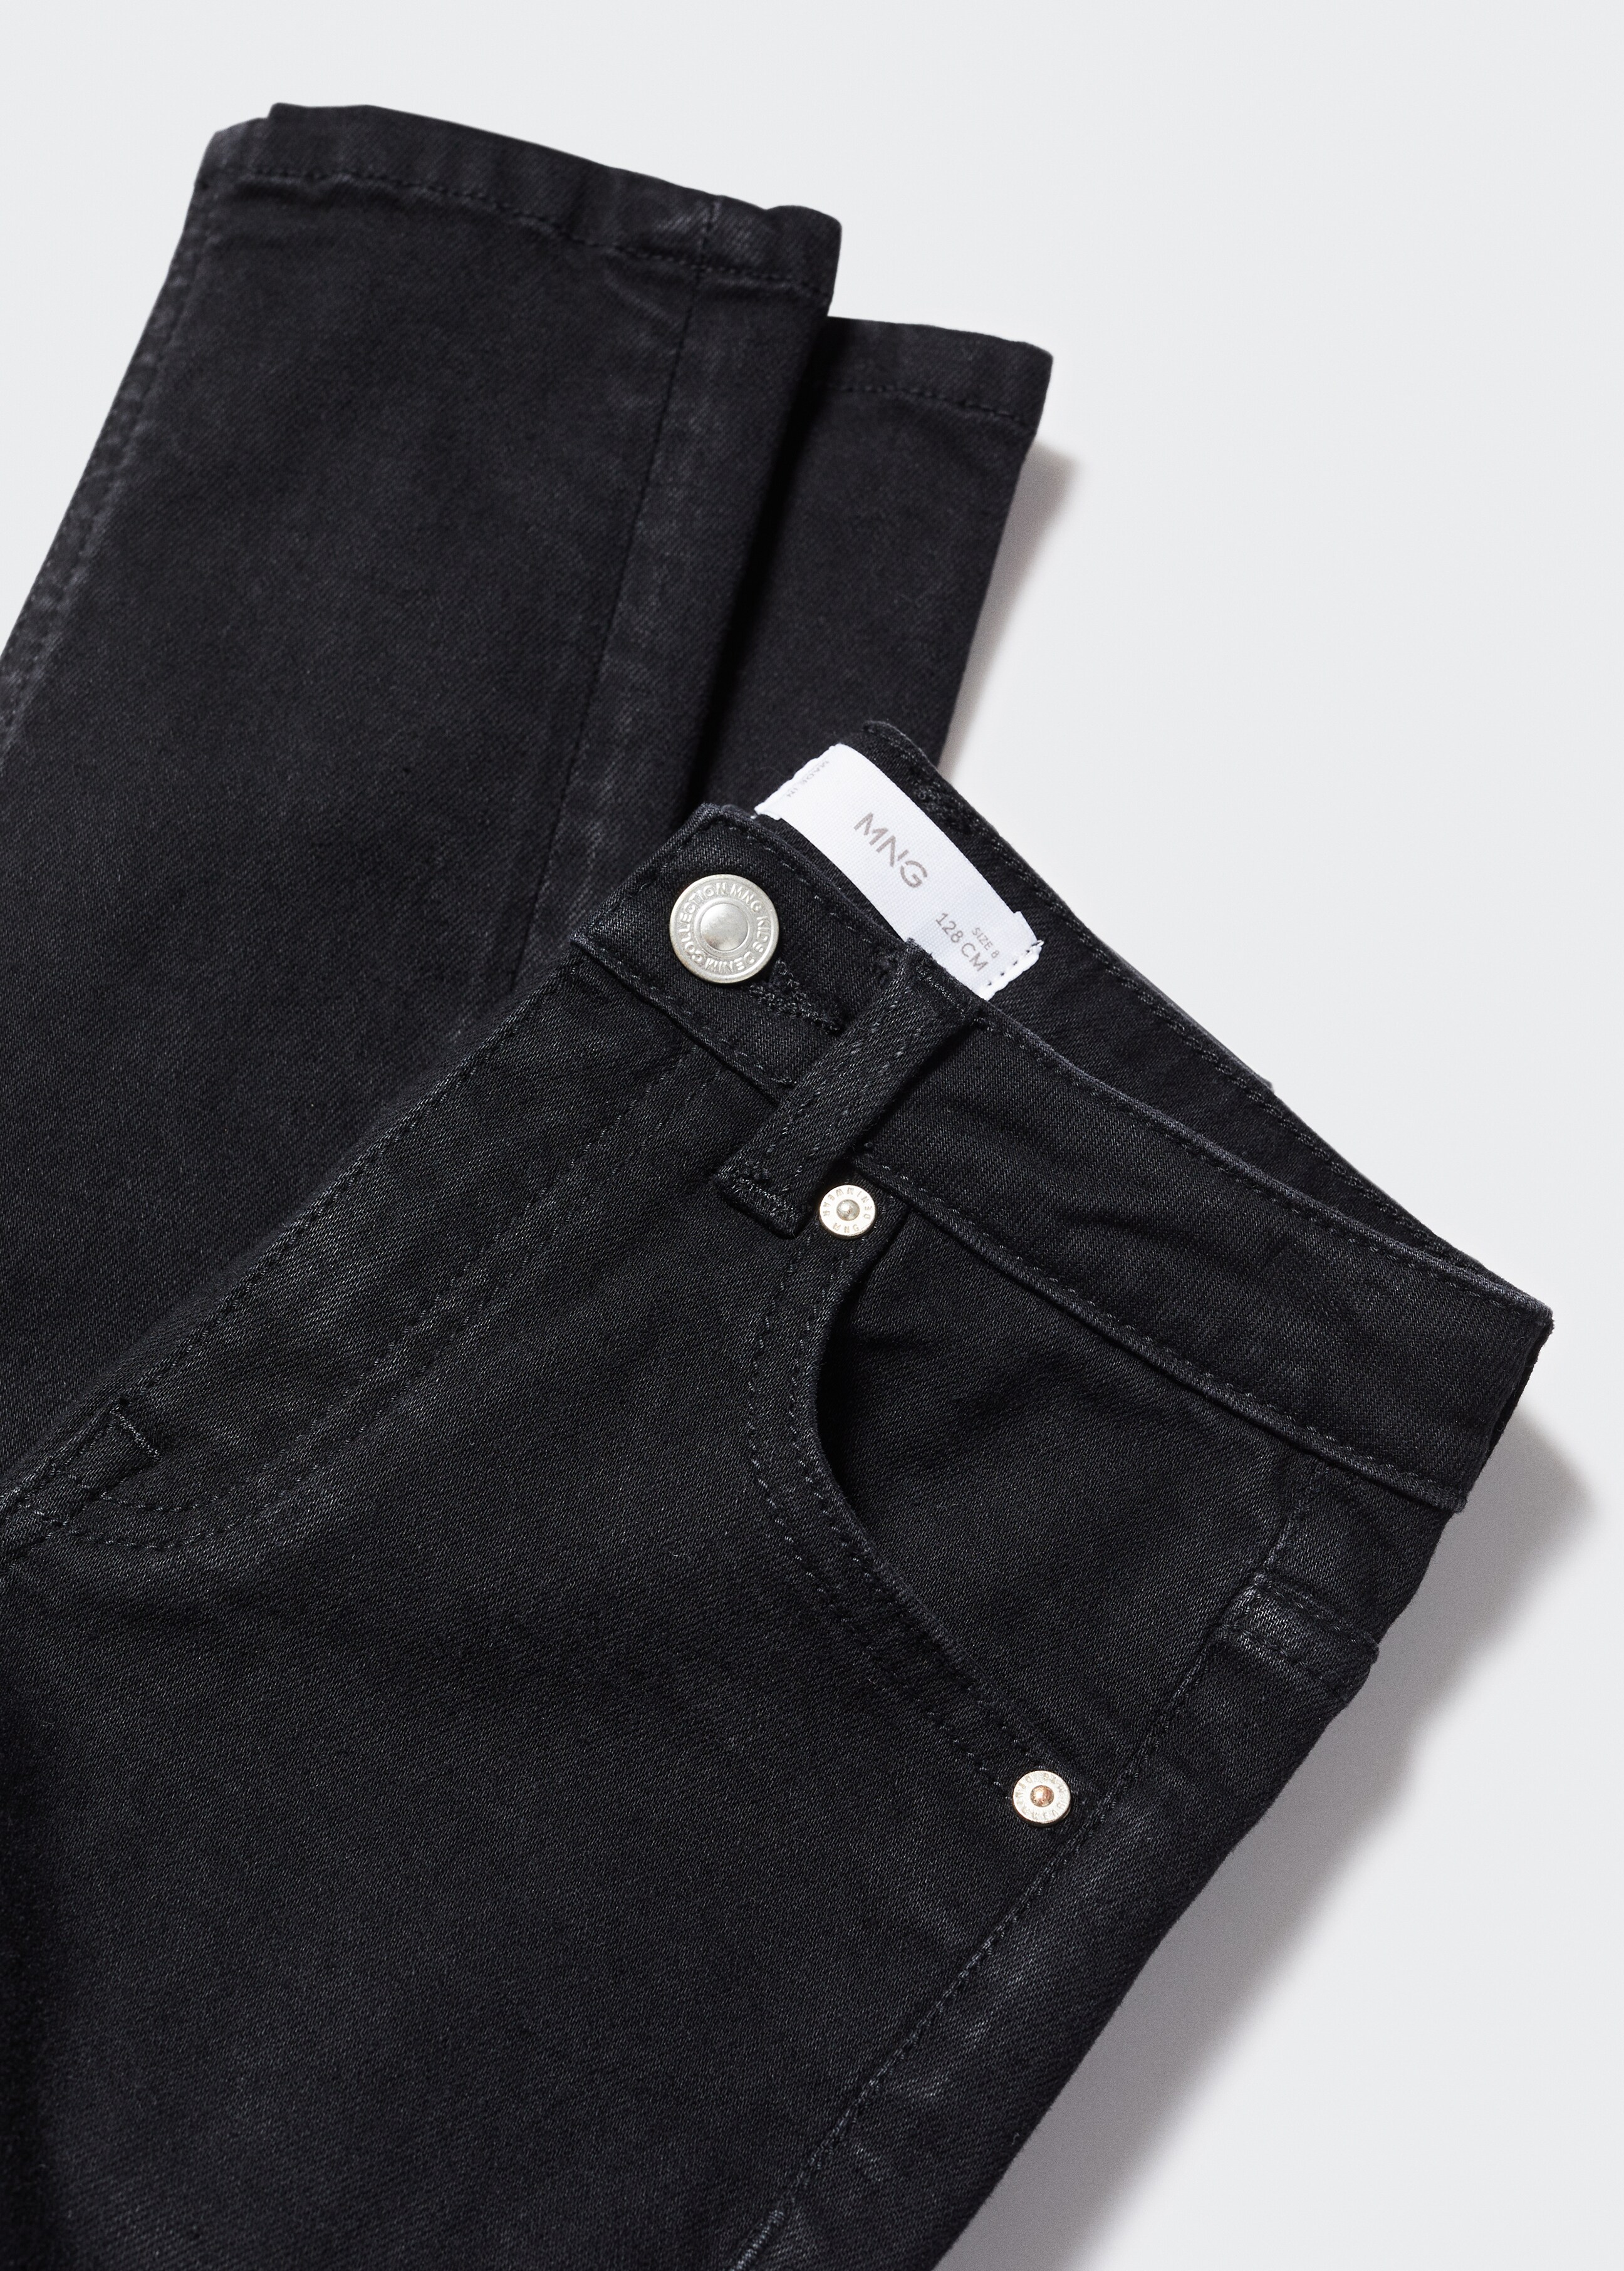 Skinny jeans - Details of the article 8